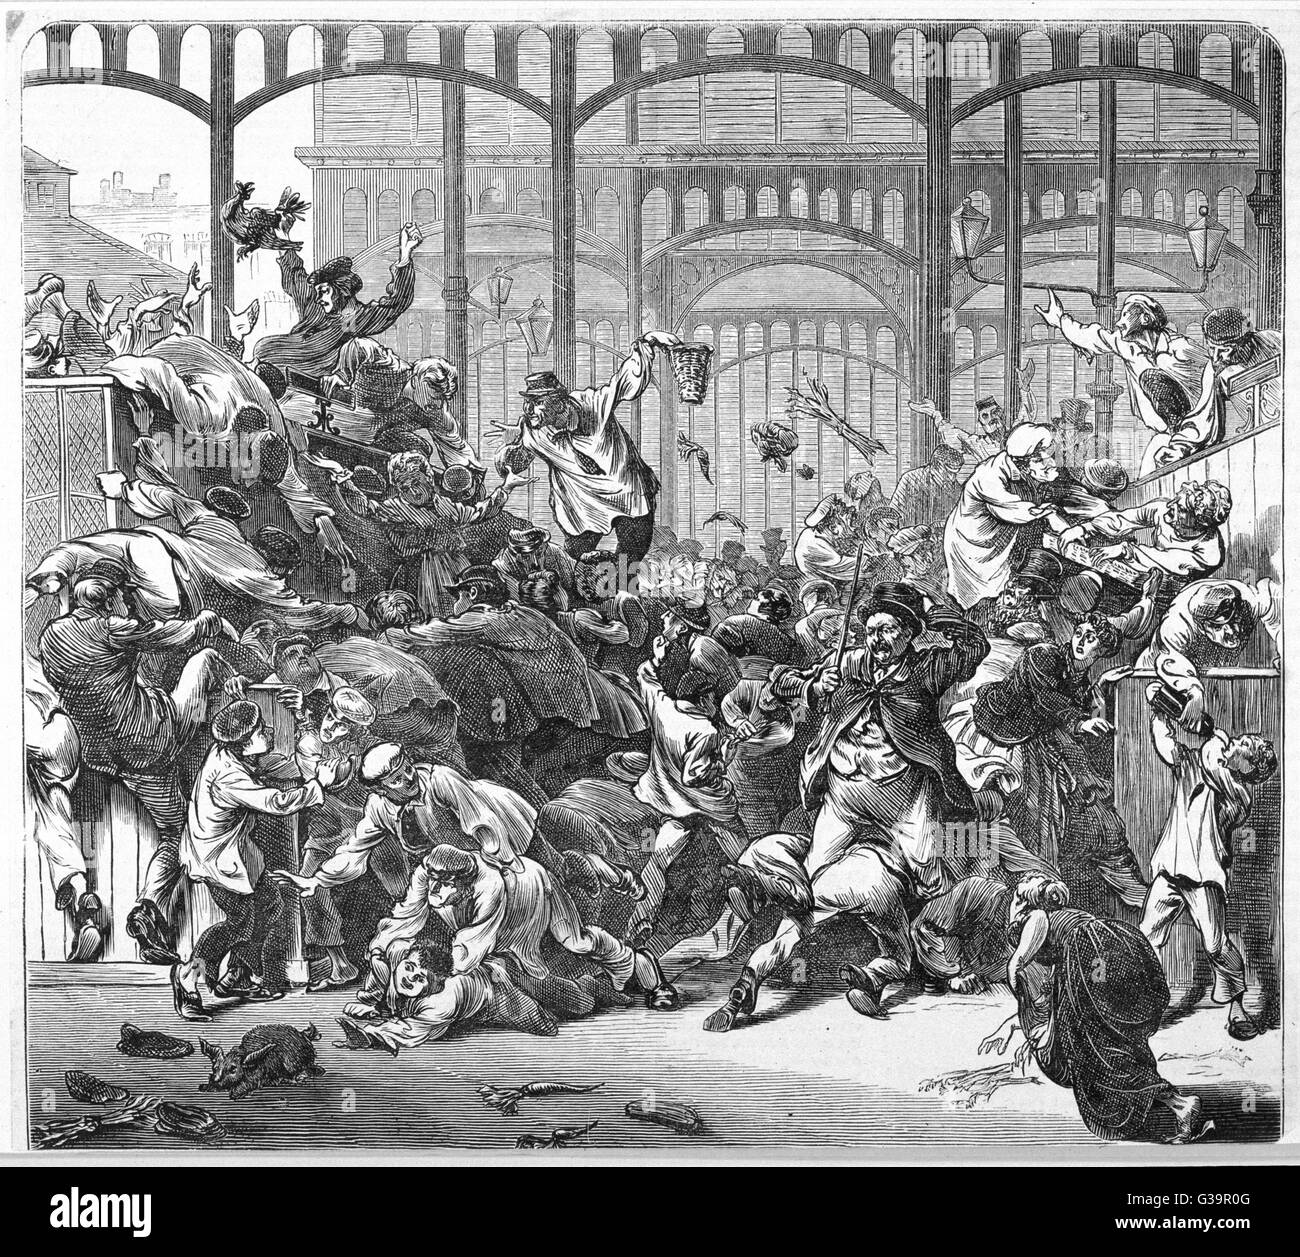 A raid on the provision  dealers of Les Halles by  hungry hoards during the Paris Commune       Date: 1871 Stock Photo